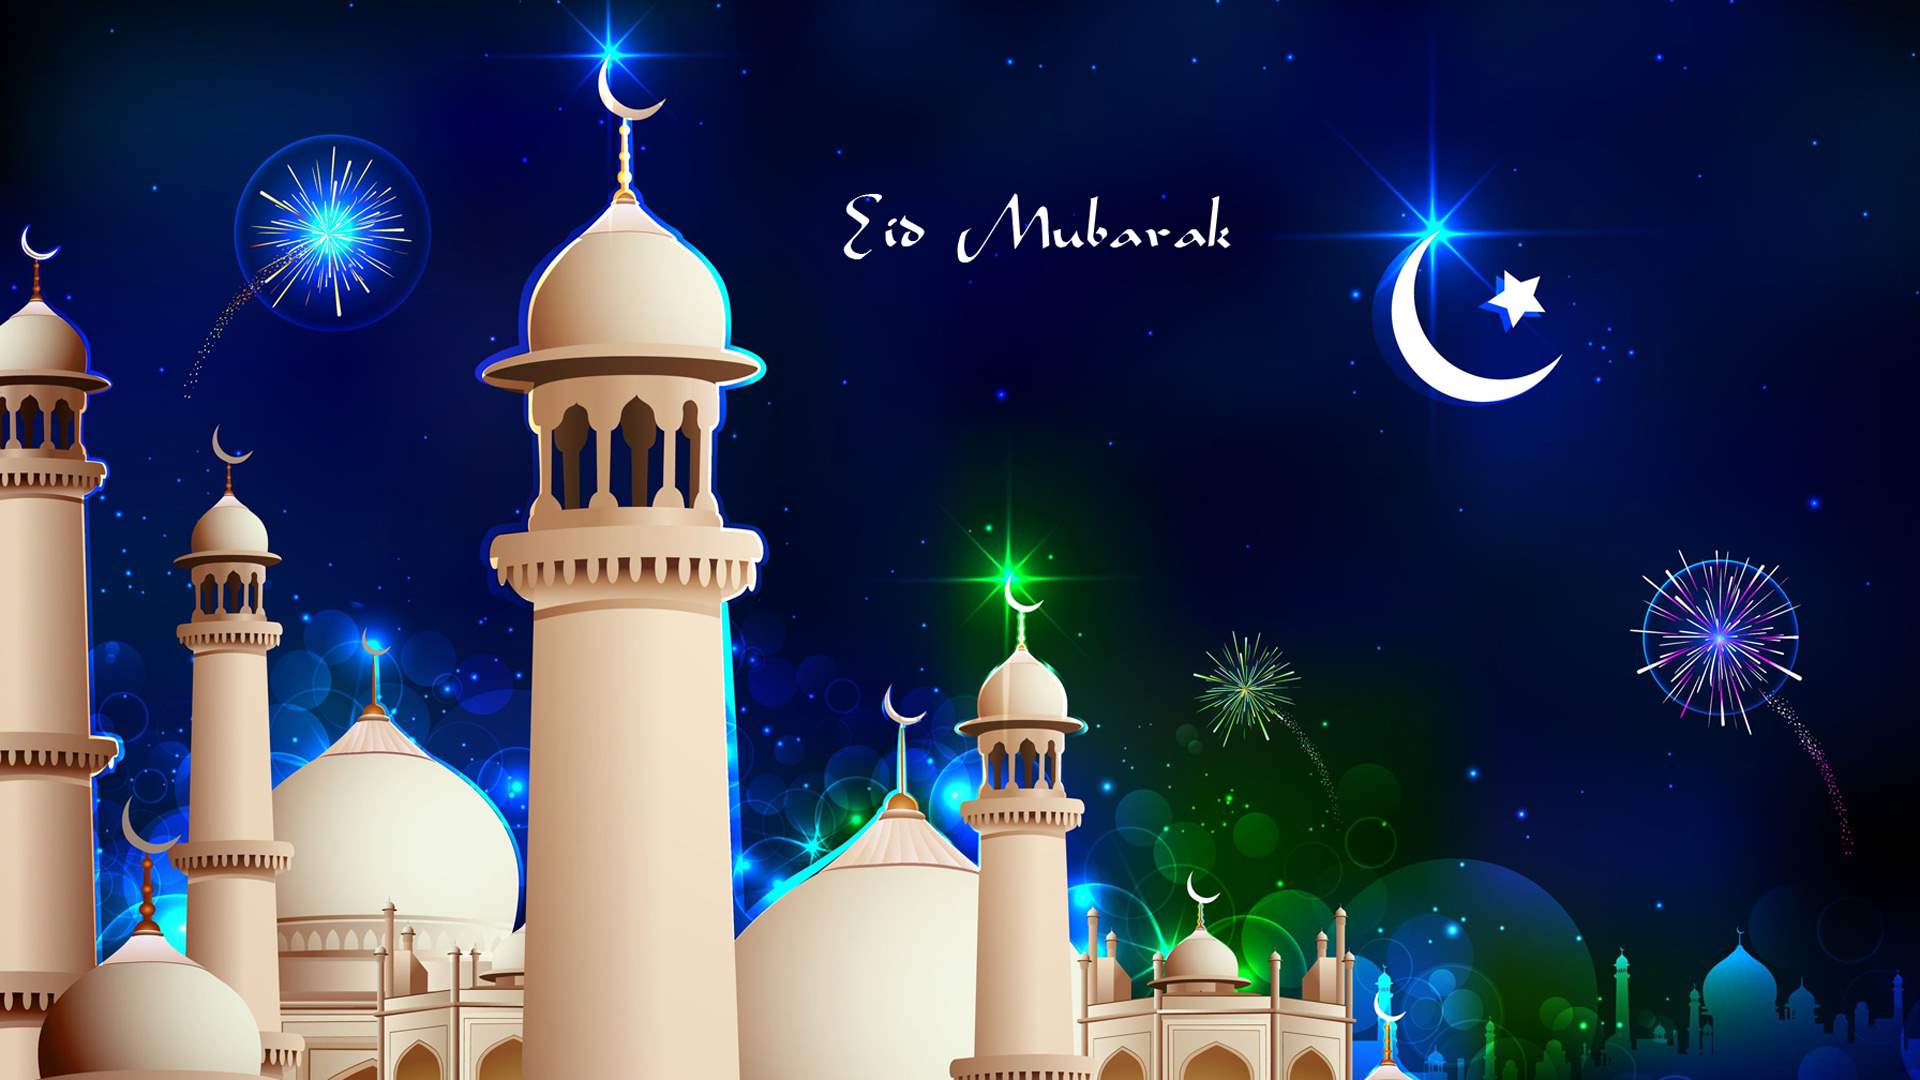 Free download 2015 HD Wallpaper then feel to share these Ramadan